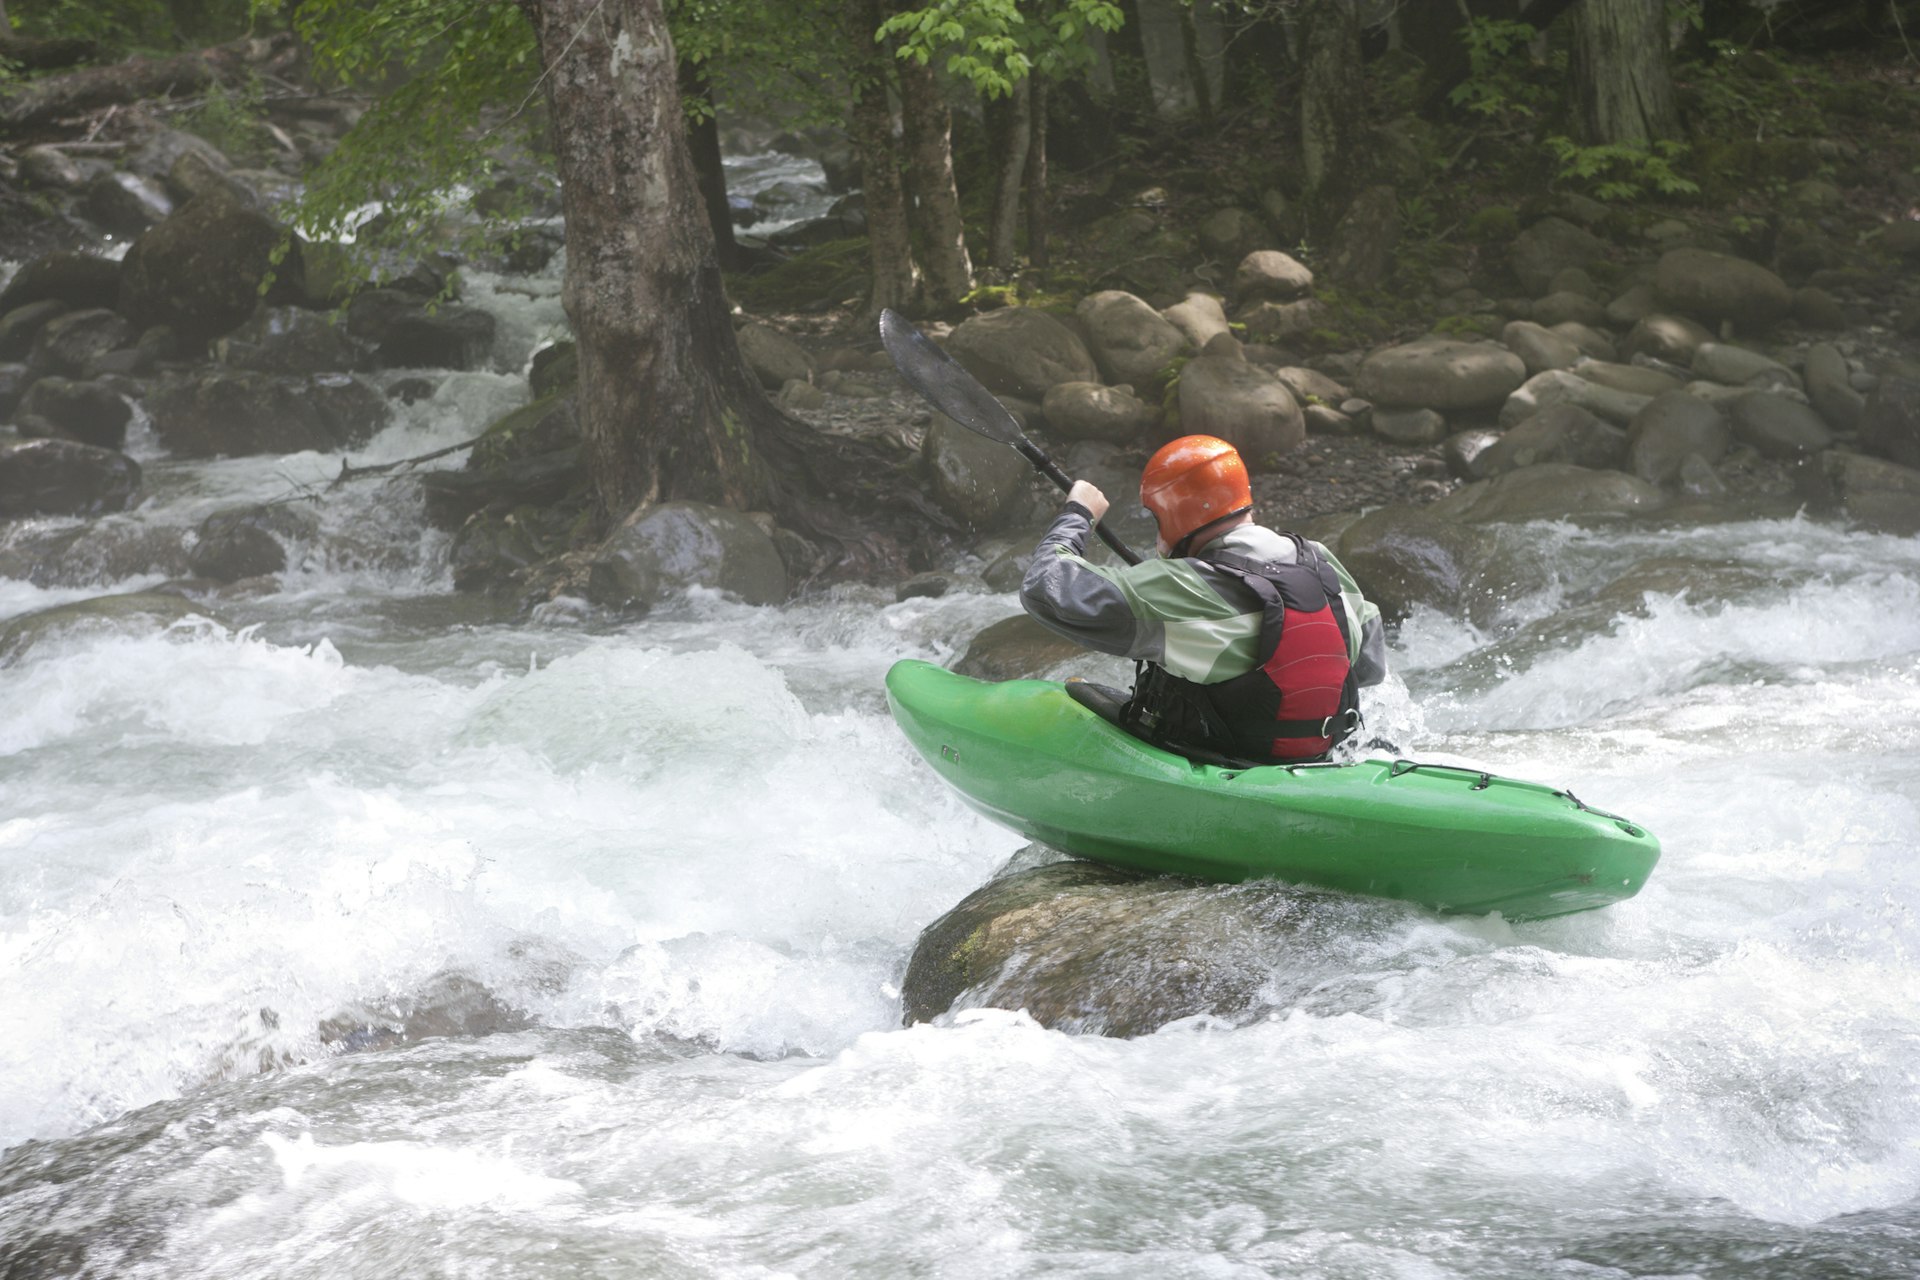 A kayaker on a rock prepares to head down some white water rapids in a fast-flowing creek